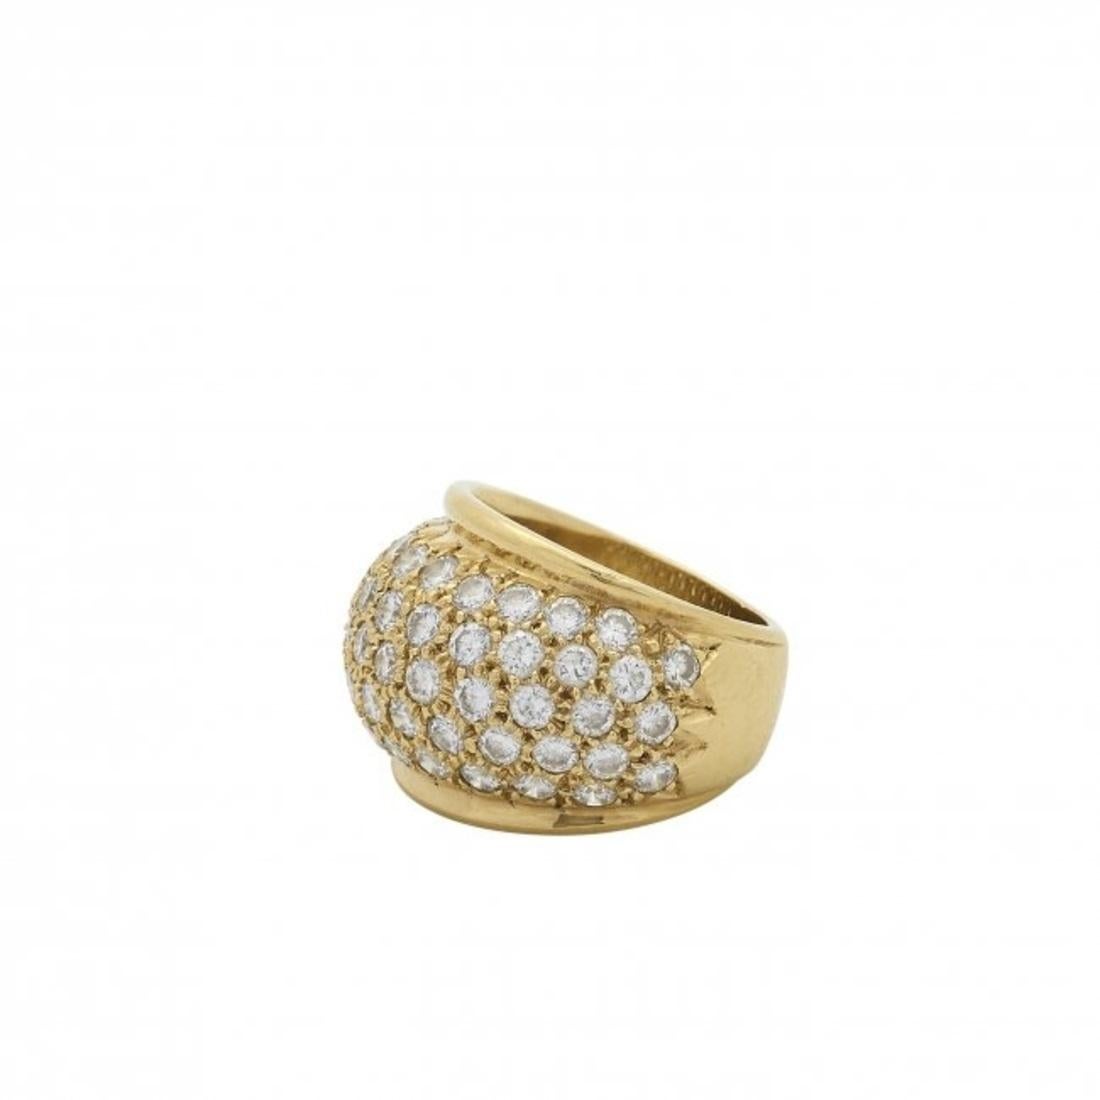 Gold & Diamond Ring 
The ring features full-cut diamonds weighing a total of approximately 3.10 carats
set in 18k gold
Gross weight 14.70 grams
Marked 750 
Size: 5-1/2 (sizeable)

Diamonds:
Avg Color: G-H-I 
Avg Clarity: VS 
Shape(s): full-cut